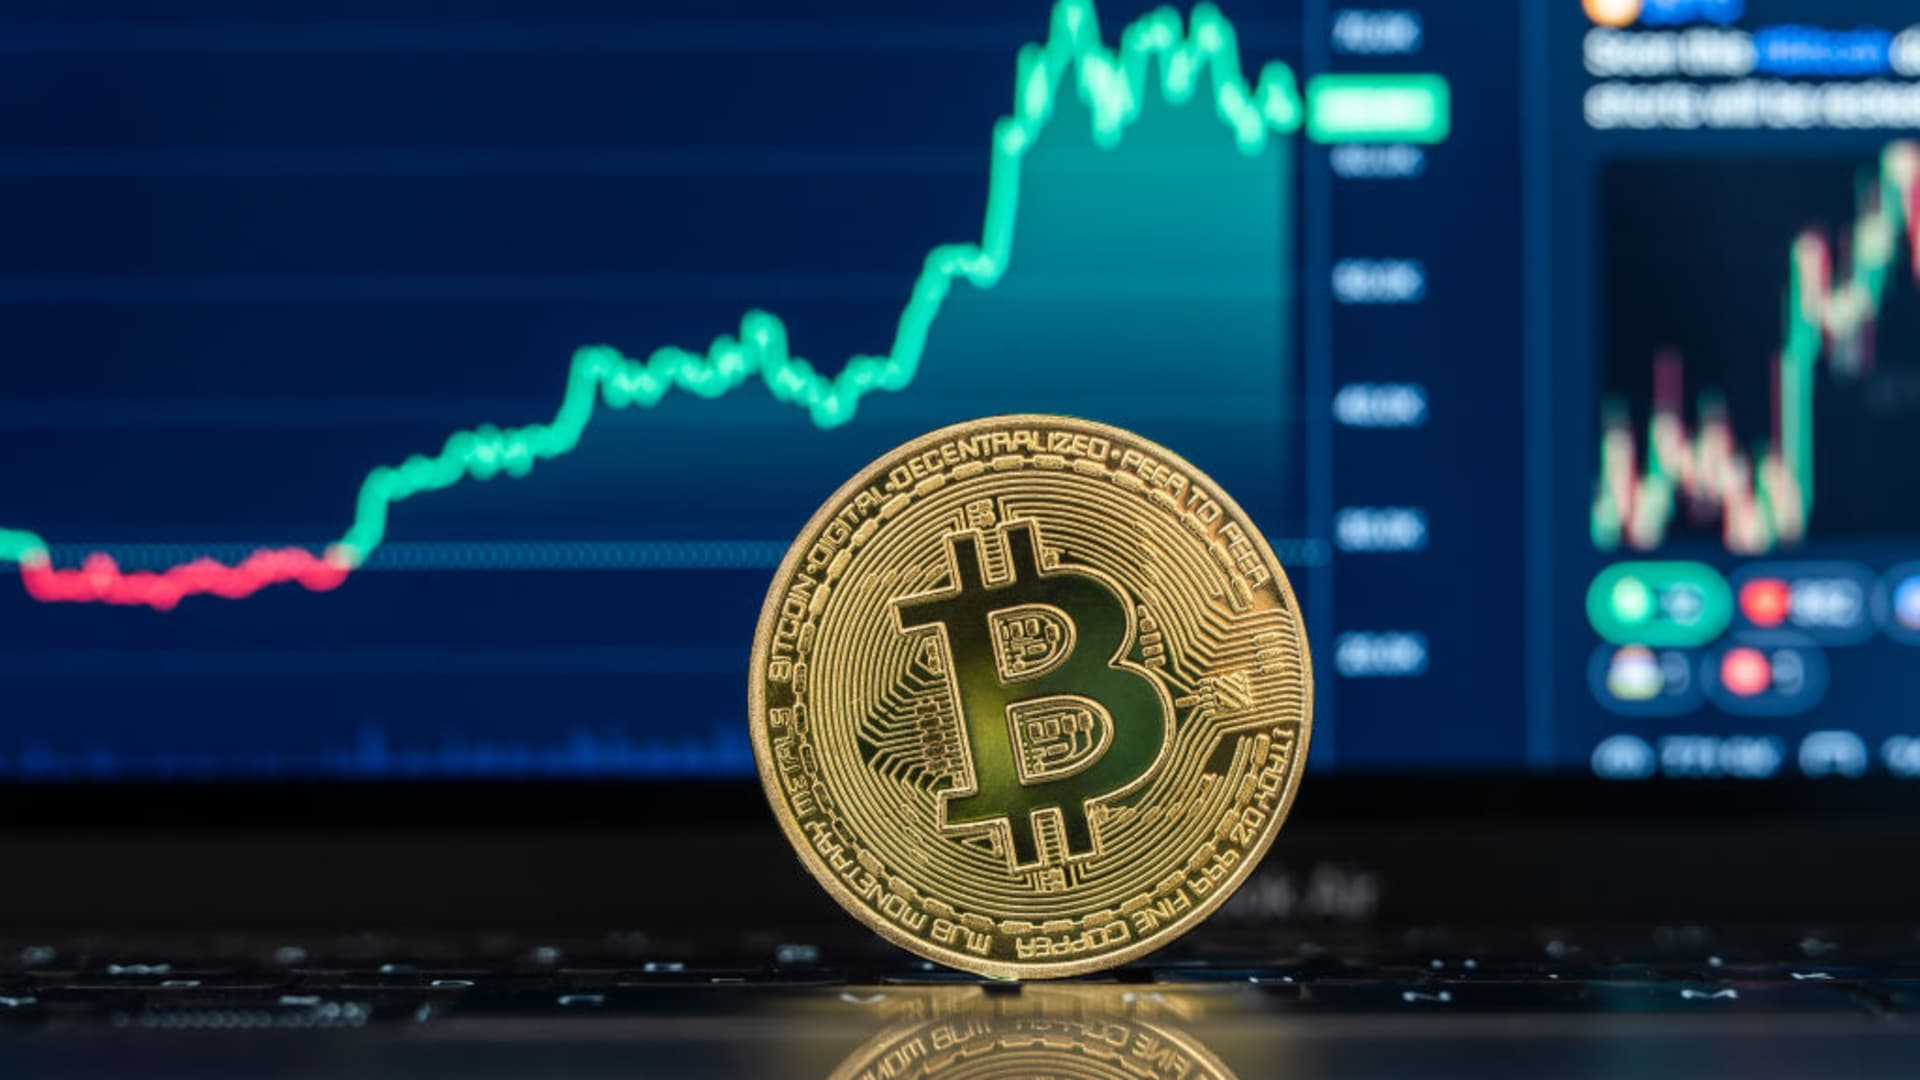 Bitcoin nosedives below $57,000 to two-month low ahead of U.S. Fed decision | MuaneToraya